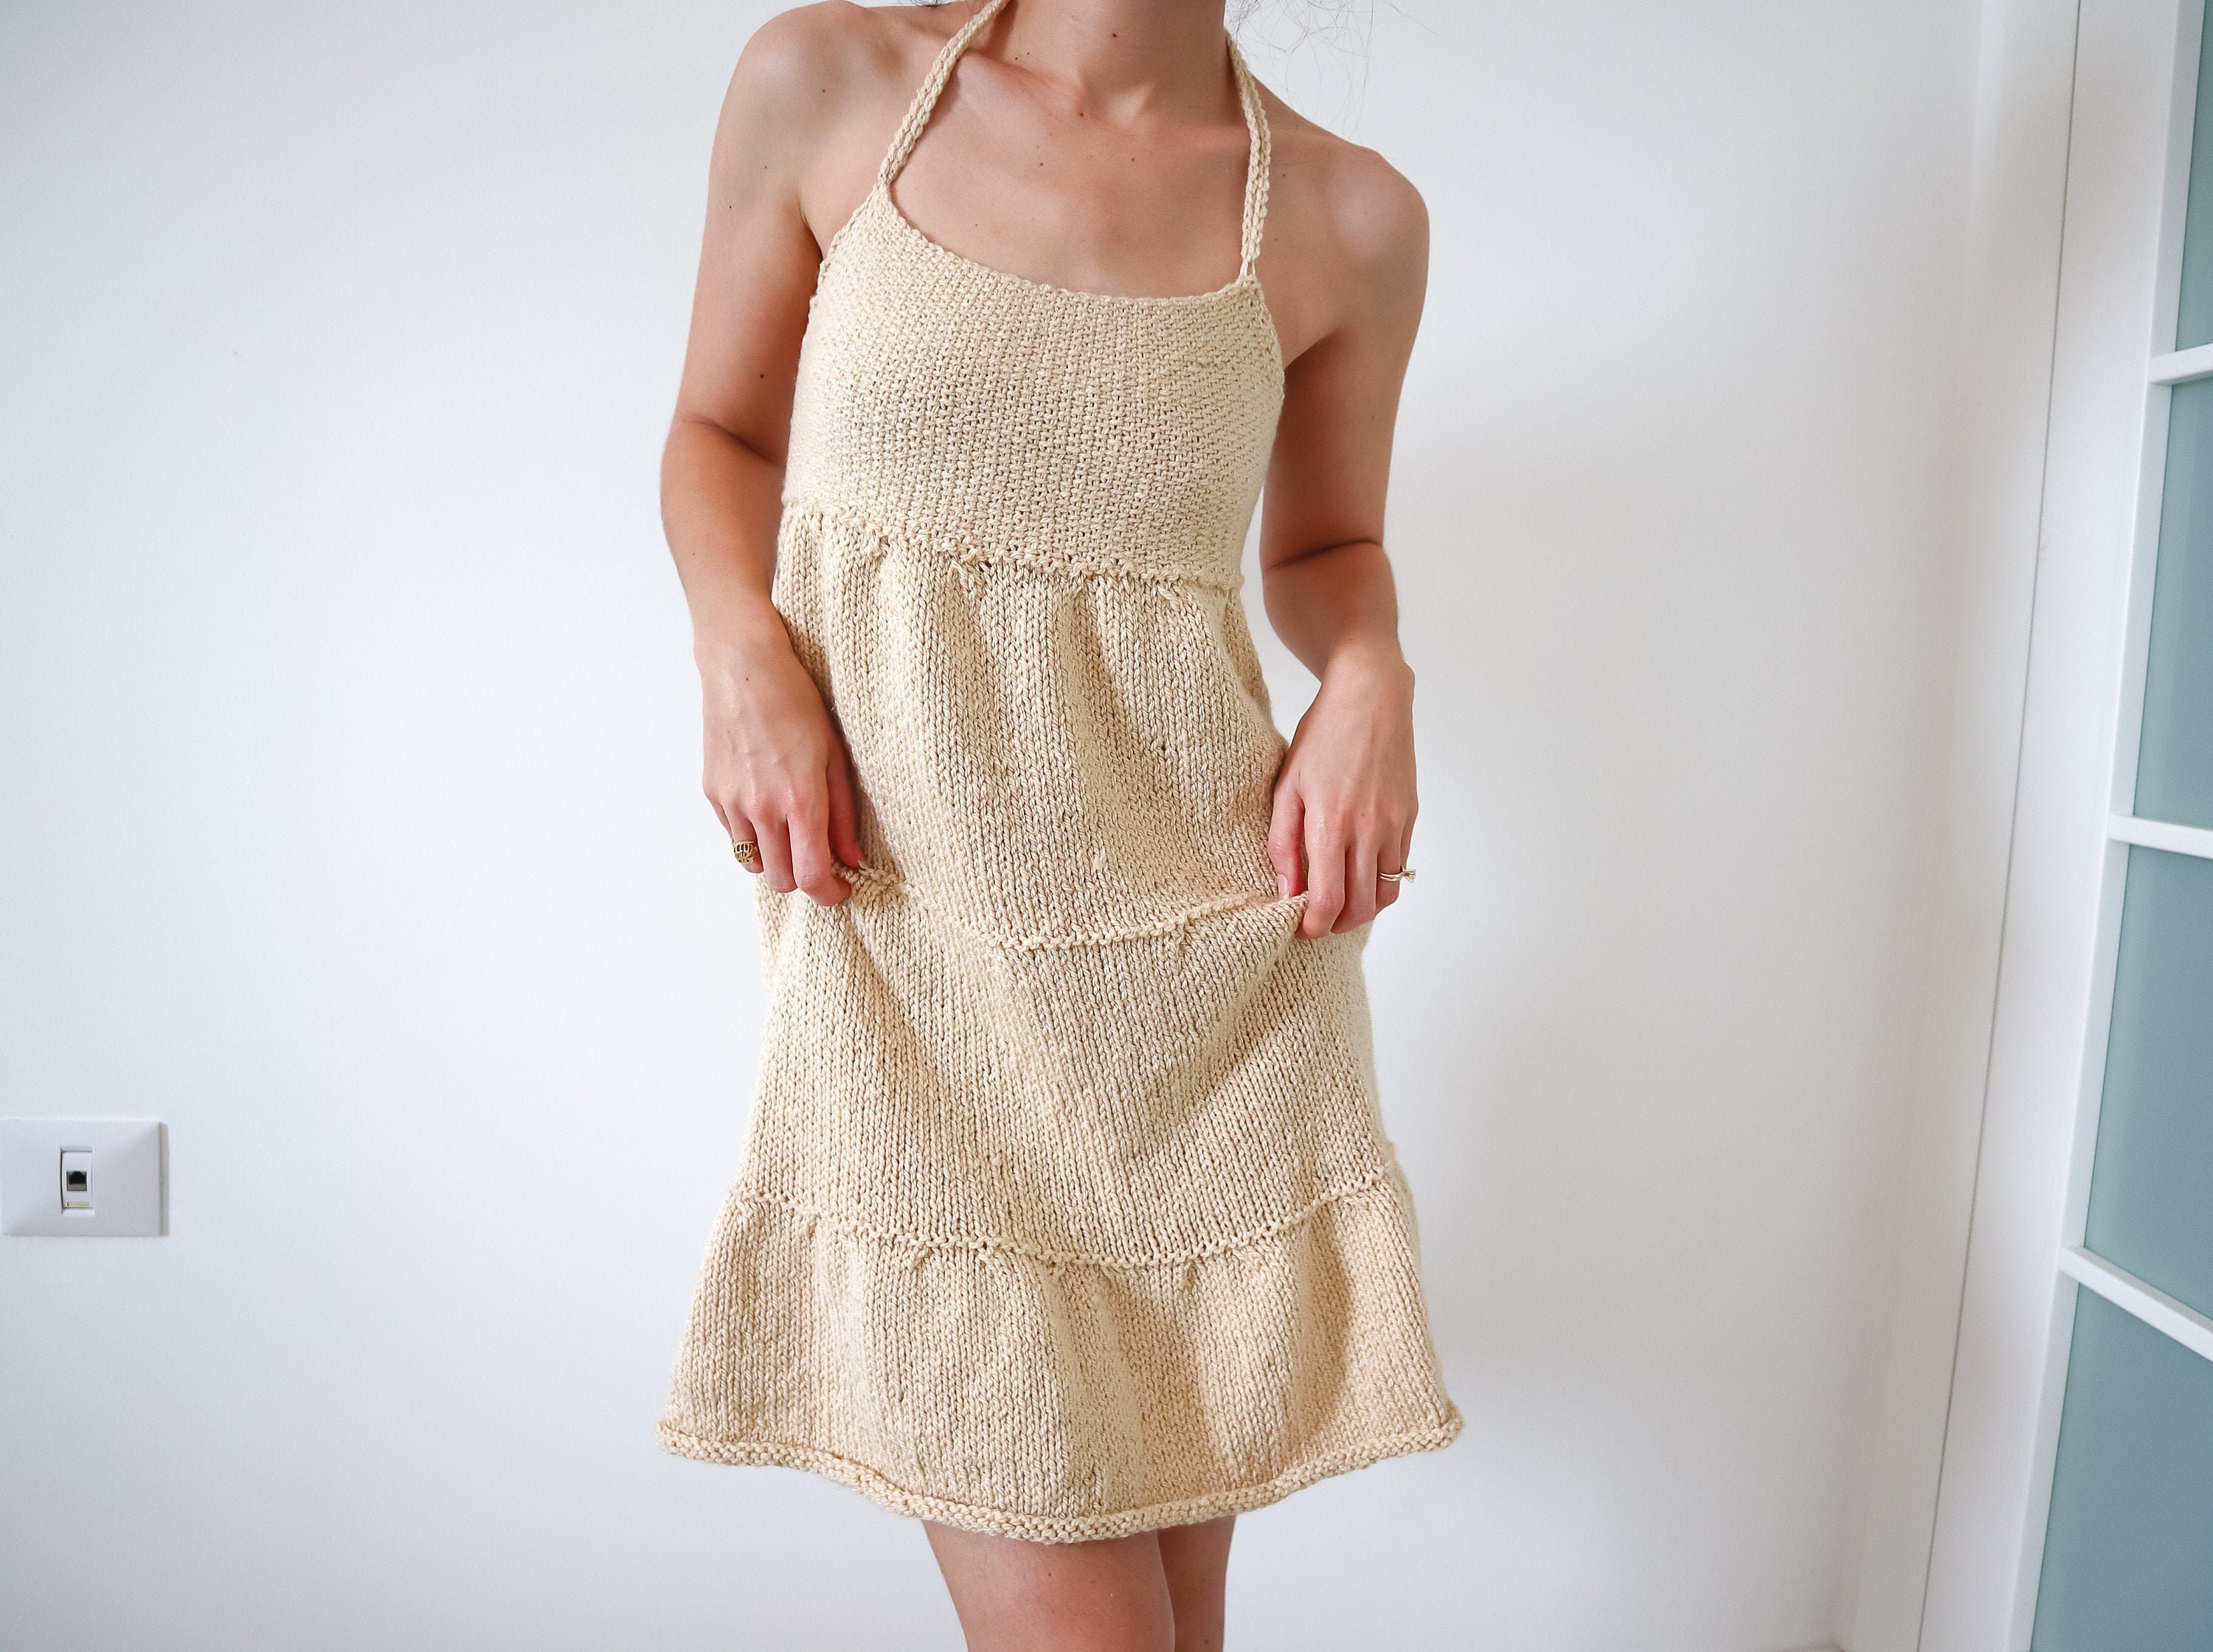 Three Tiered Dress Knitting Pattern, Knit Dress Pattern With Instructions  for Women Sizes Small to Extra Large. Knitted Summer Cover Up 